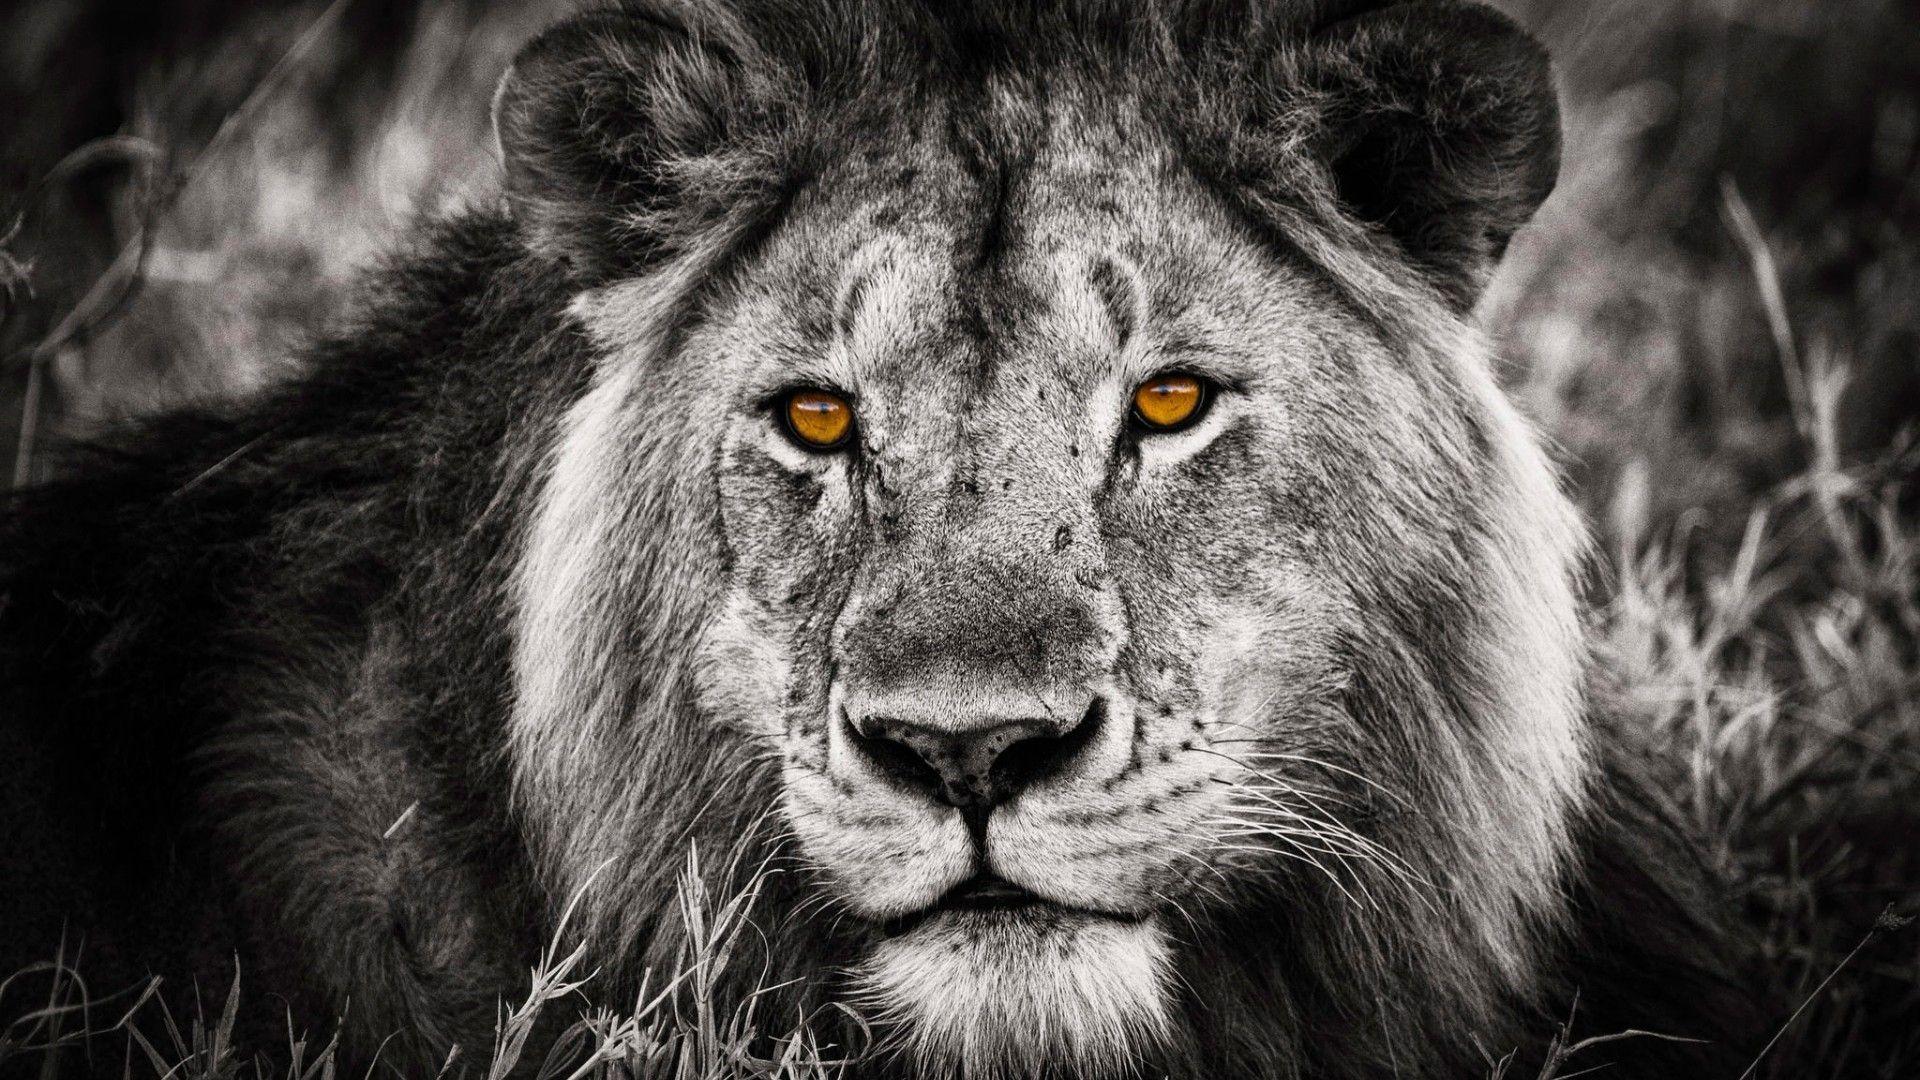 Black and White Lion Wallpapers - Top Free Black and White Lion